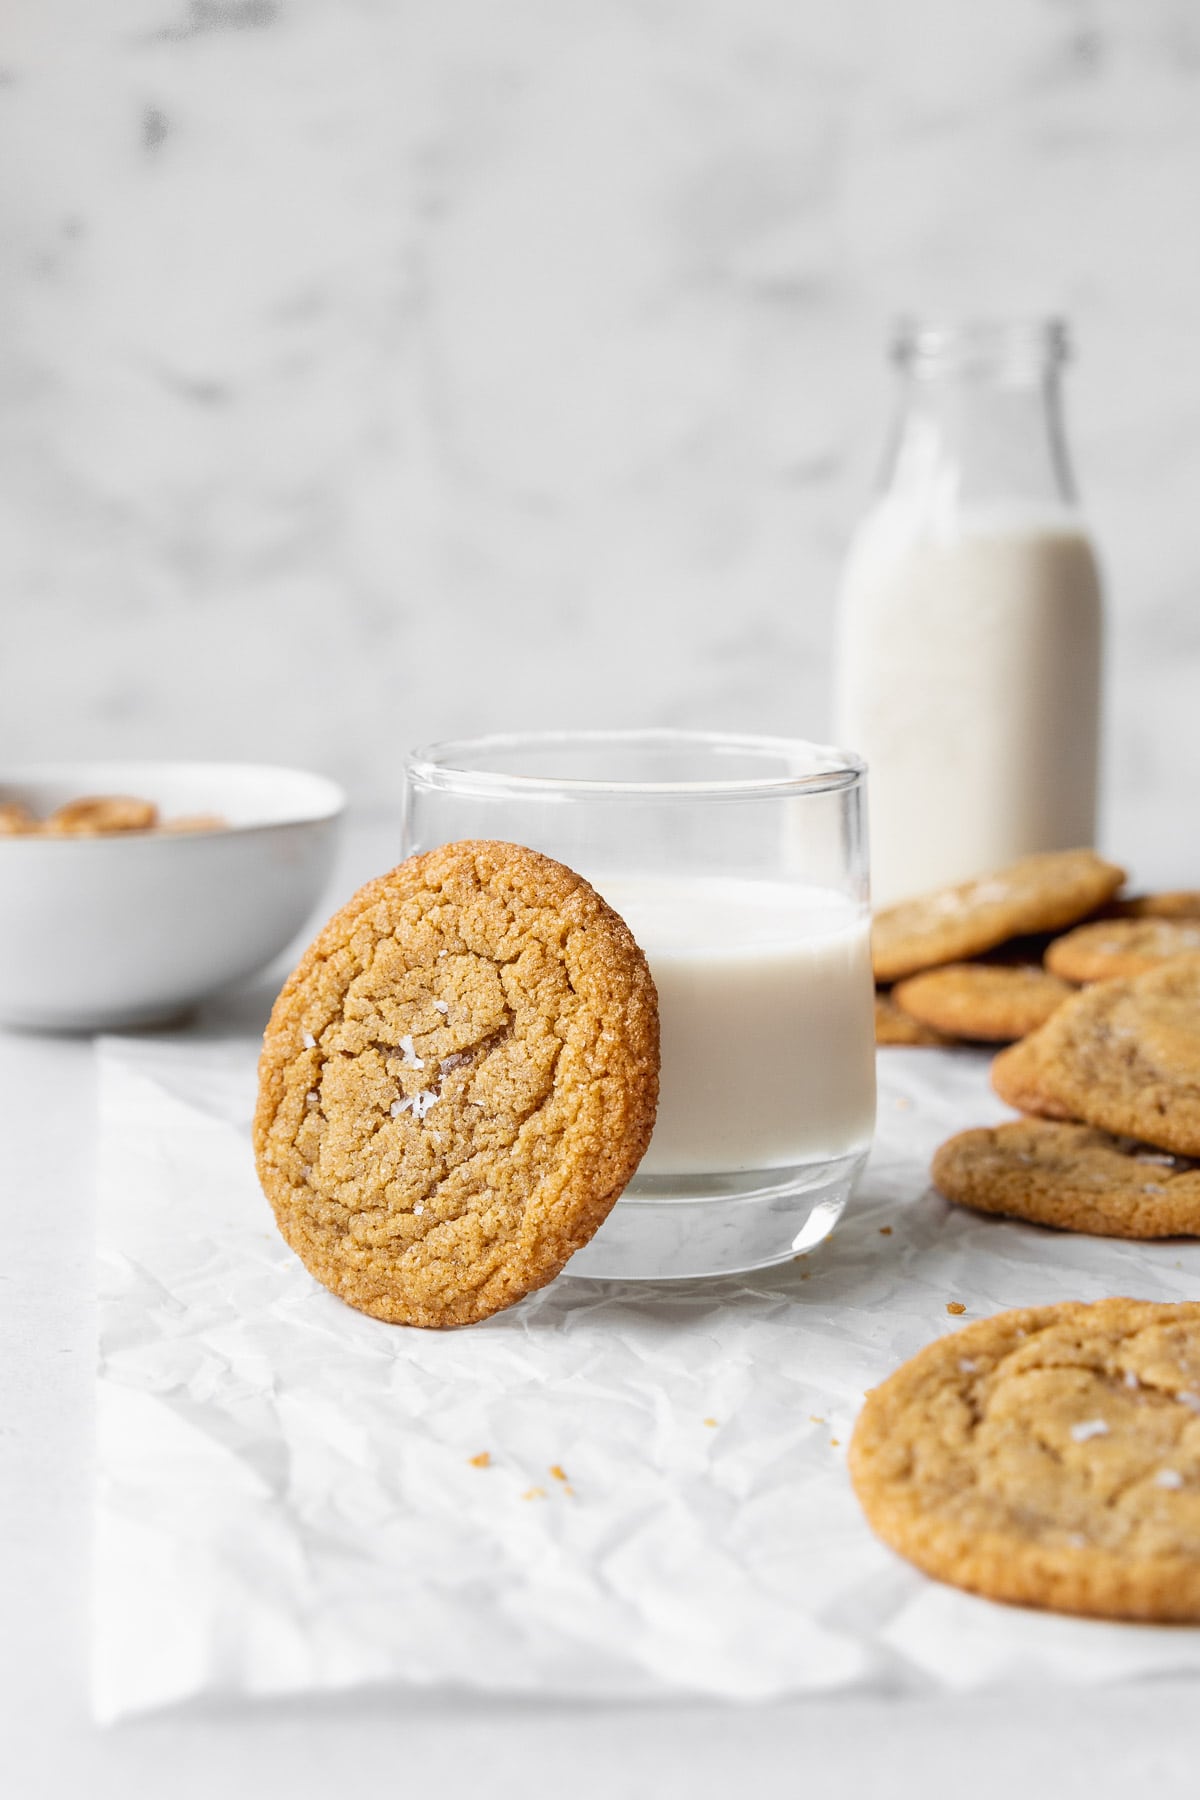 A dairy-free peanut butter cookie resting on a glass of milk.